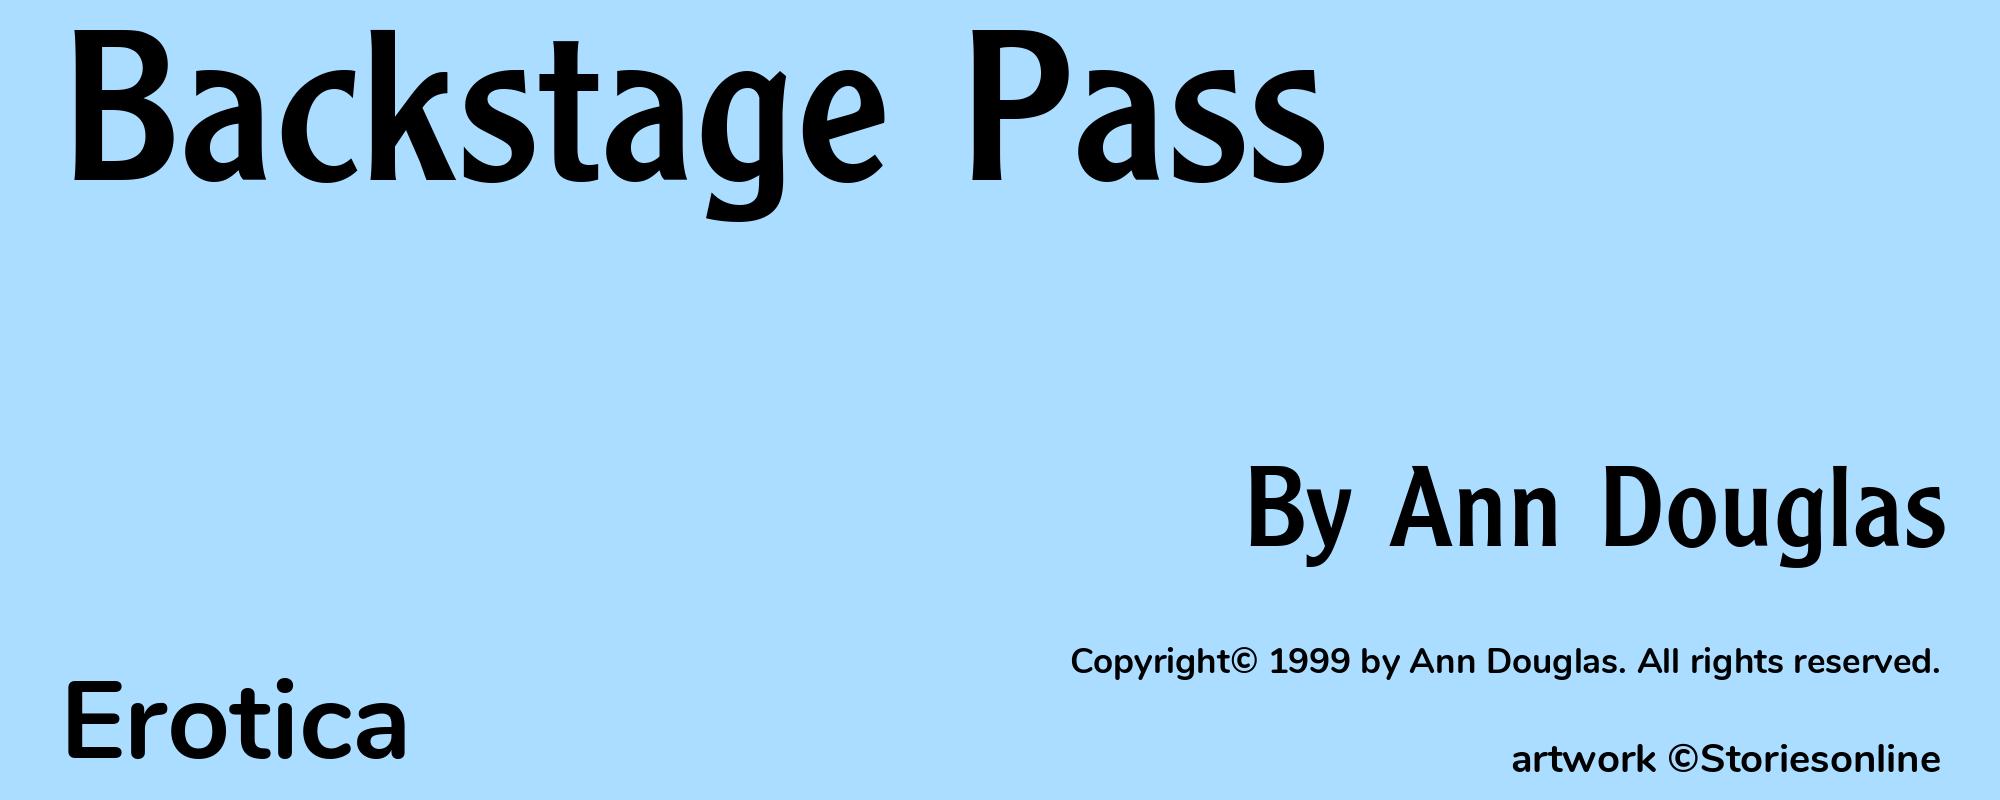 Backstage Pass - Cover